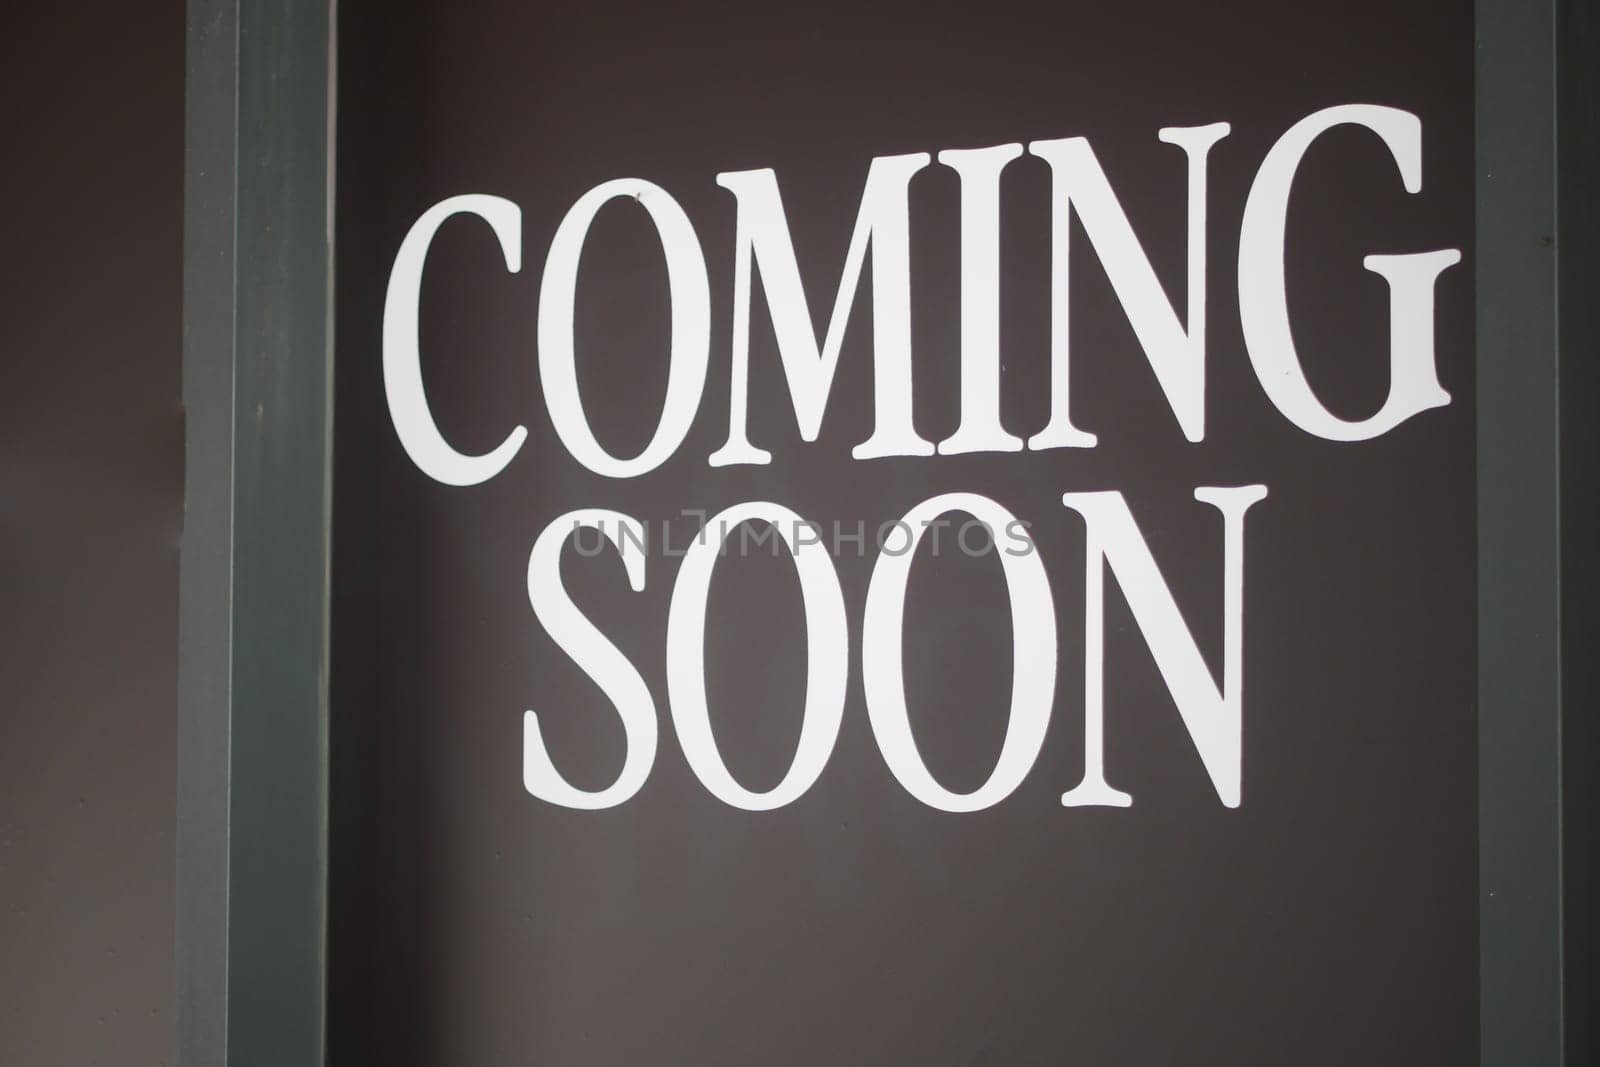 Highquality image of Coming Soon sign on dark background conveys anticipation for upcoming event or announcement